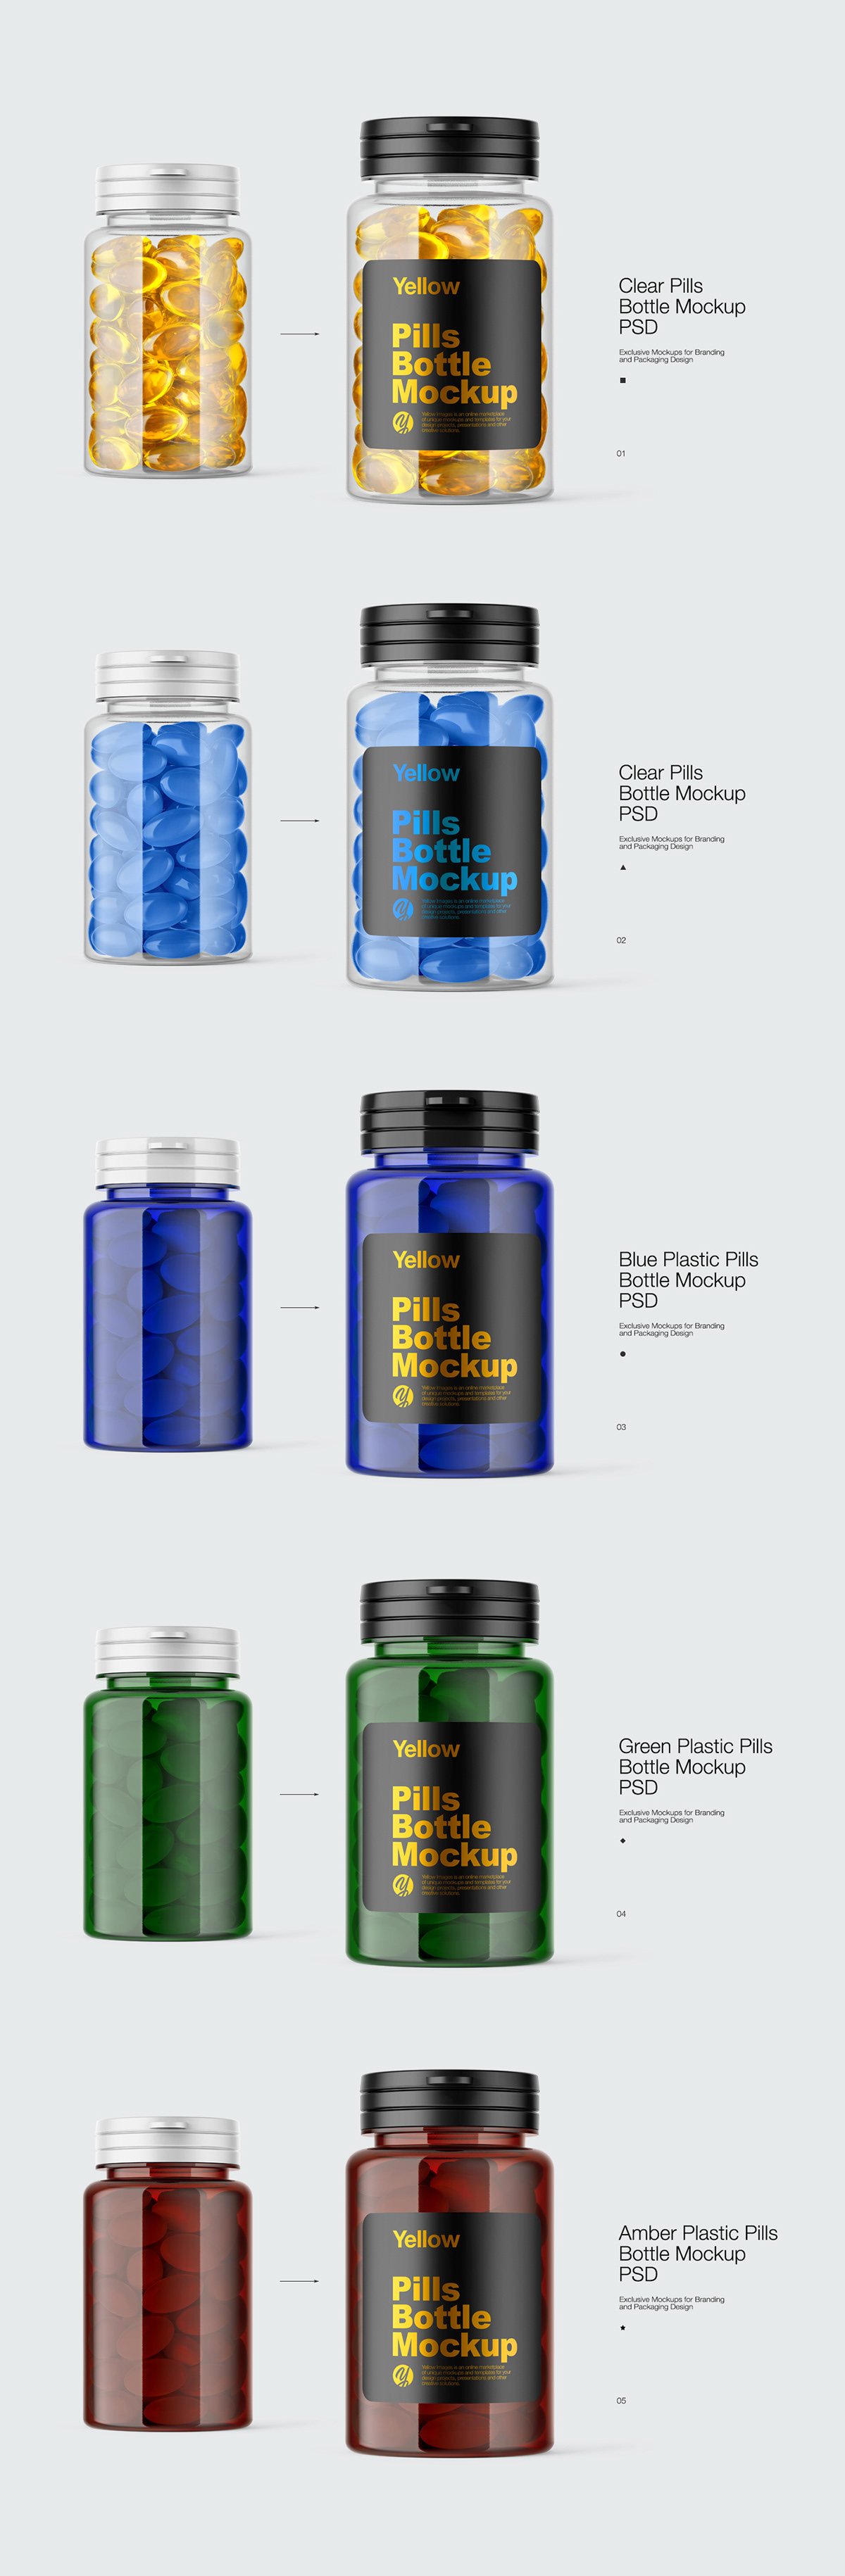 Download Plastic Pills Bottle Mockup Psd On Student Show Yellowimages Mockups